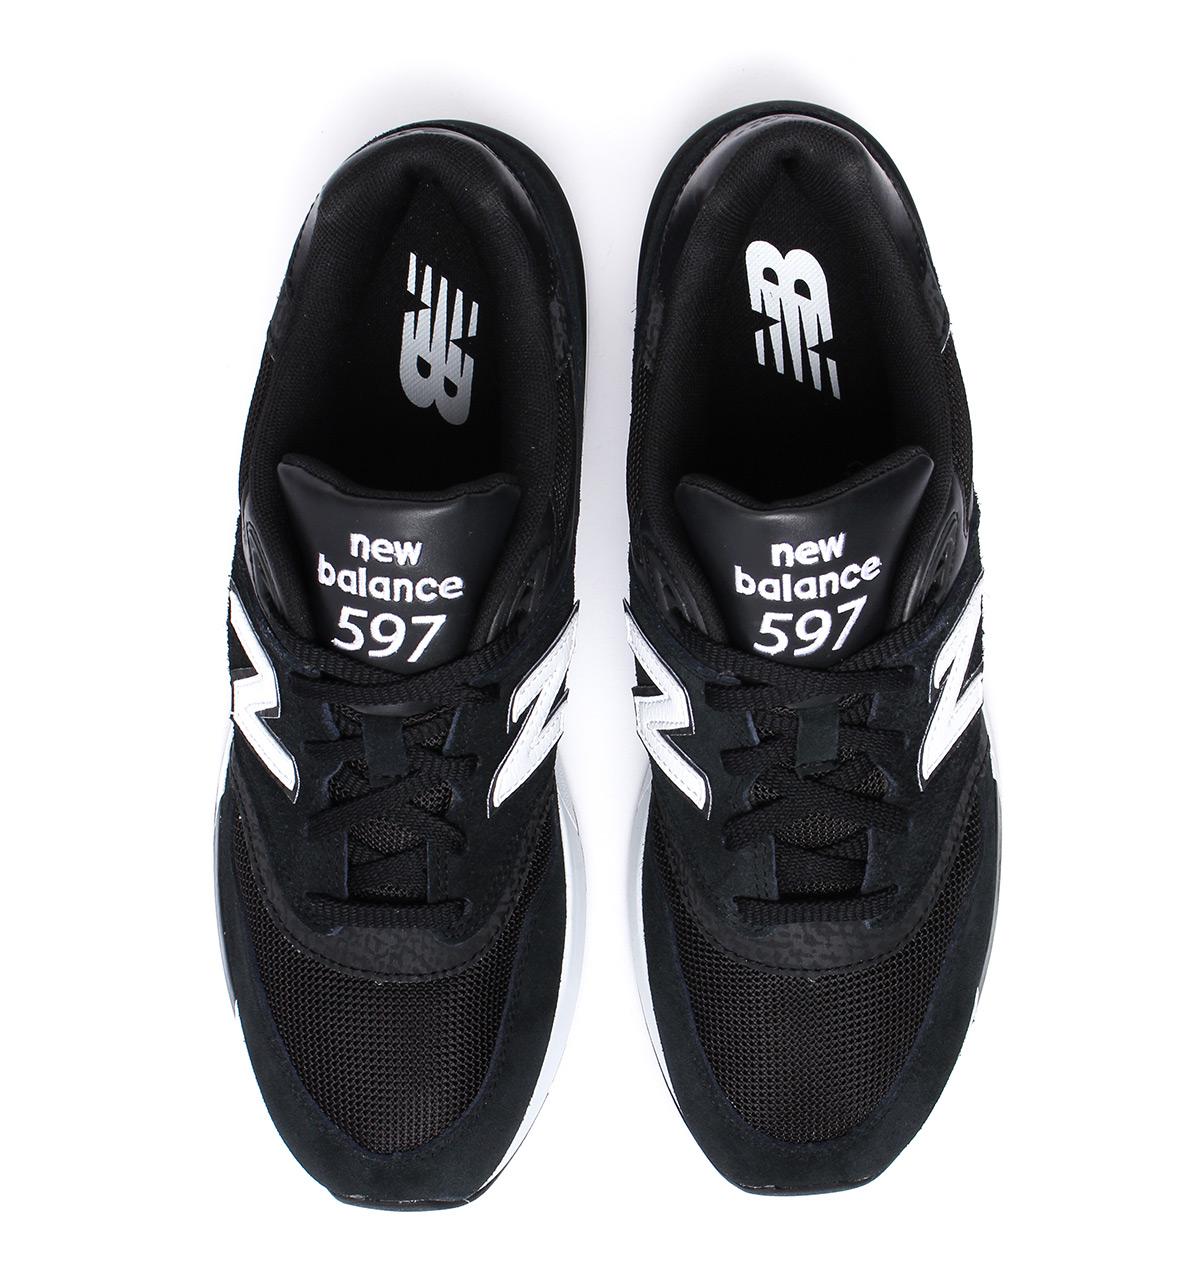 New Balance 597 Black Suede Runner Trainers for Men - Lyst